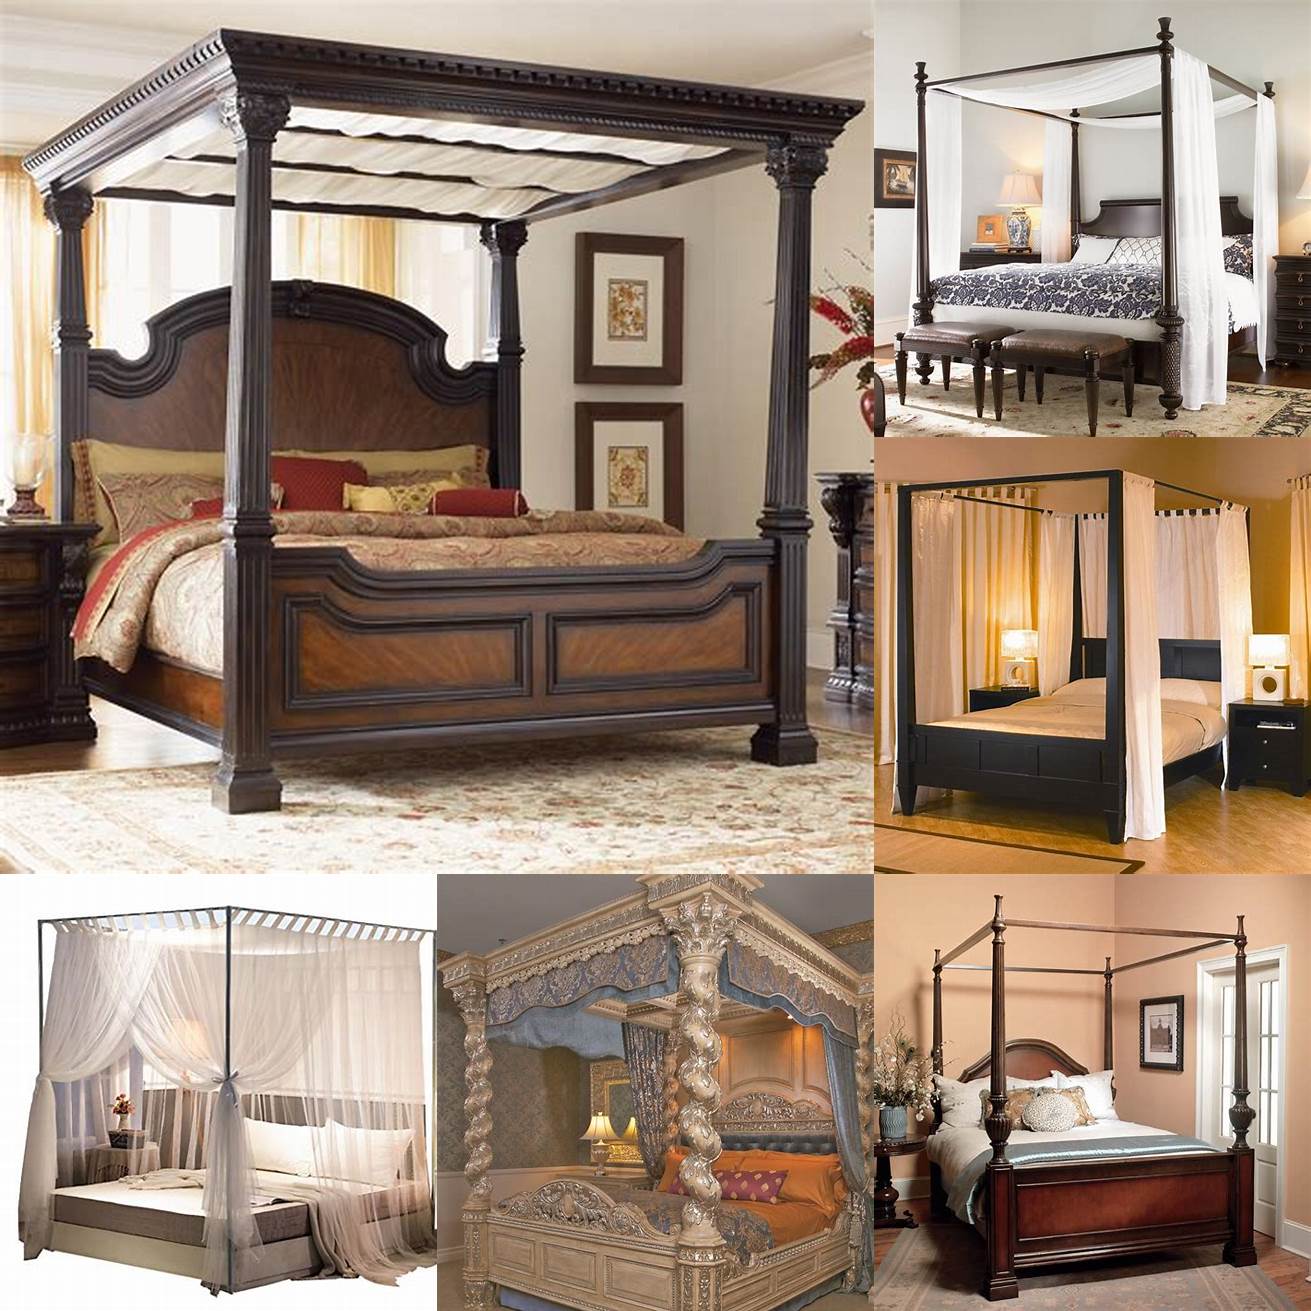 Canopy Eastern King Bed - a bed with a frame that supports a canopy or curtains